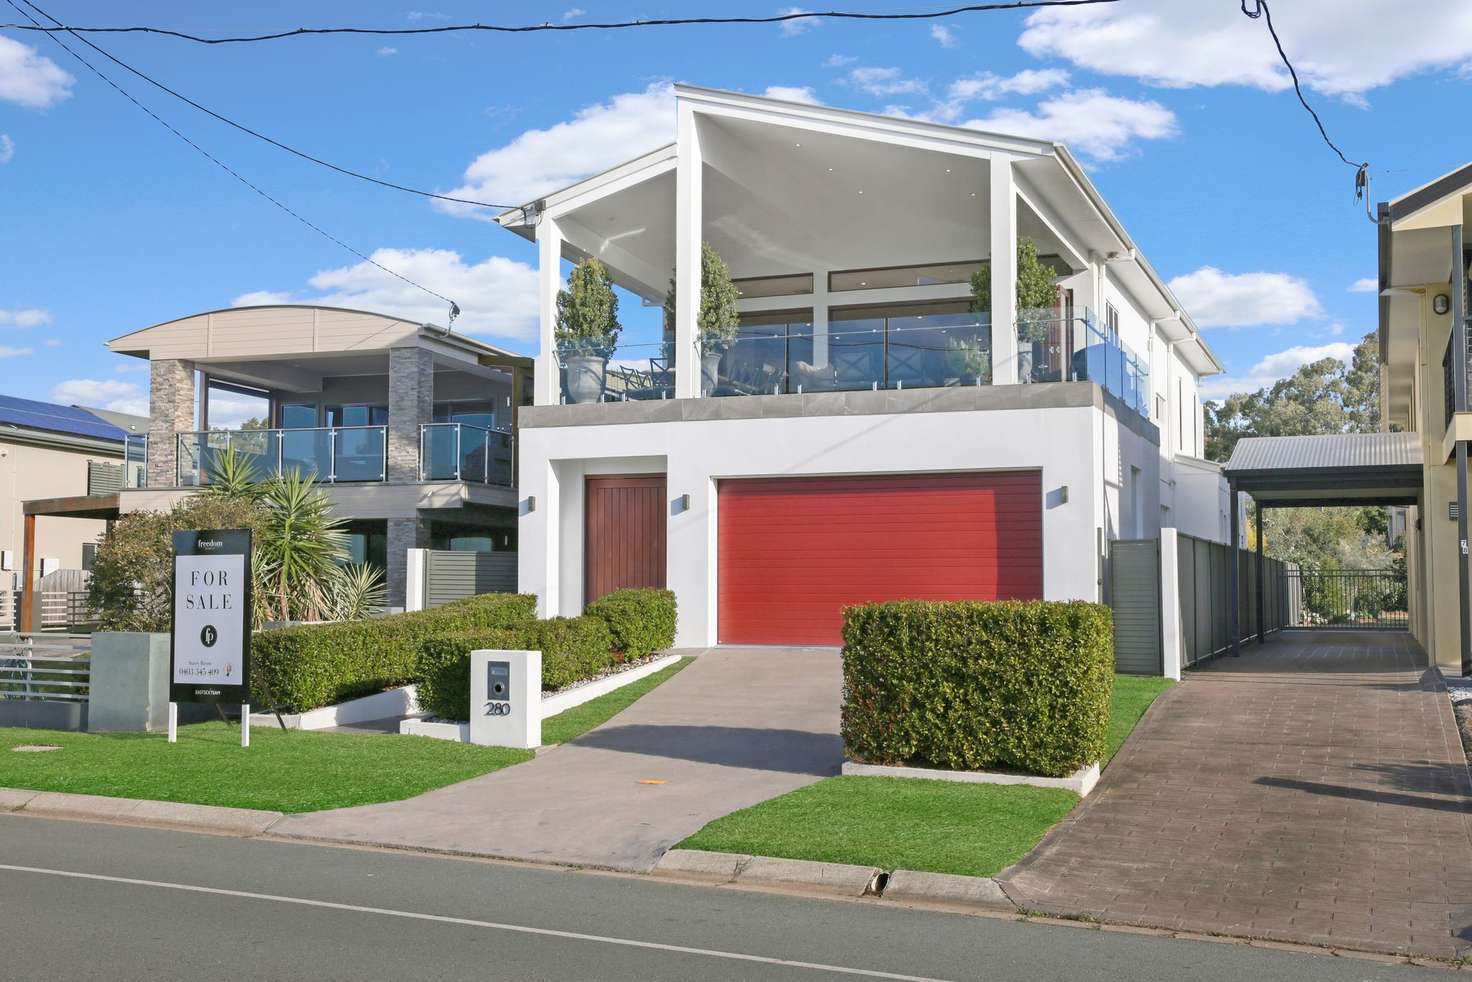 Main view of Homely house listing, 280 Queens Esplanade, Thorneside QLD 4158